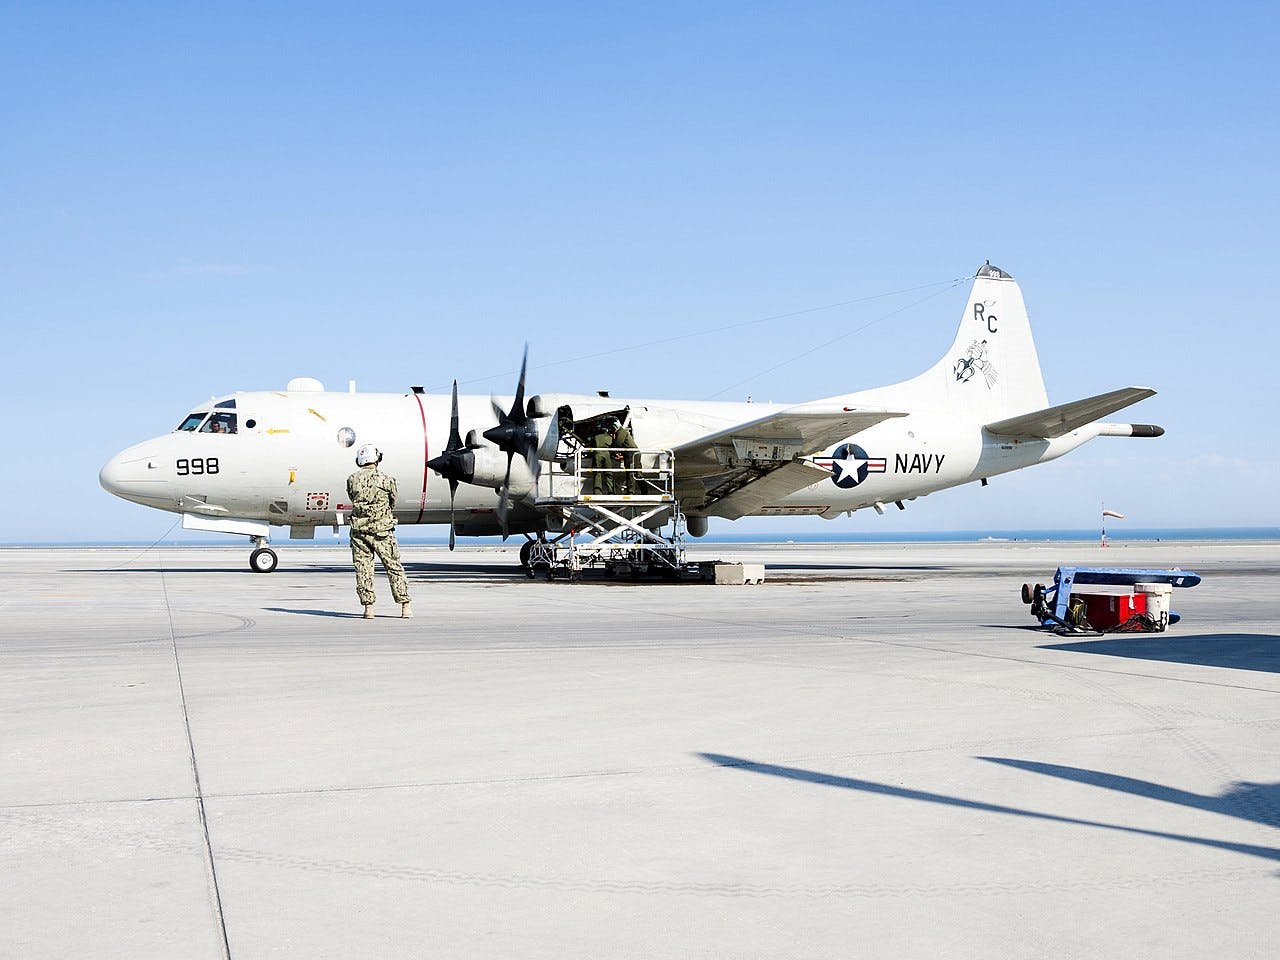 Argentina to purchase four P-3C Maritime Patrol Aircraft